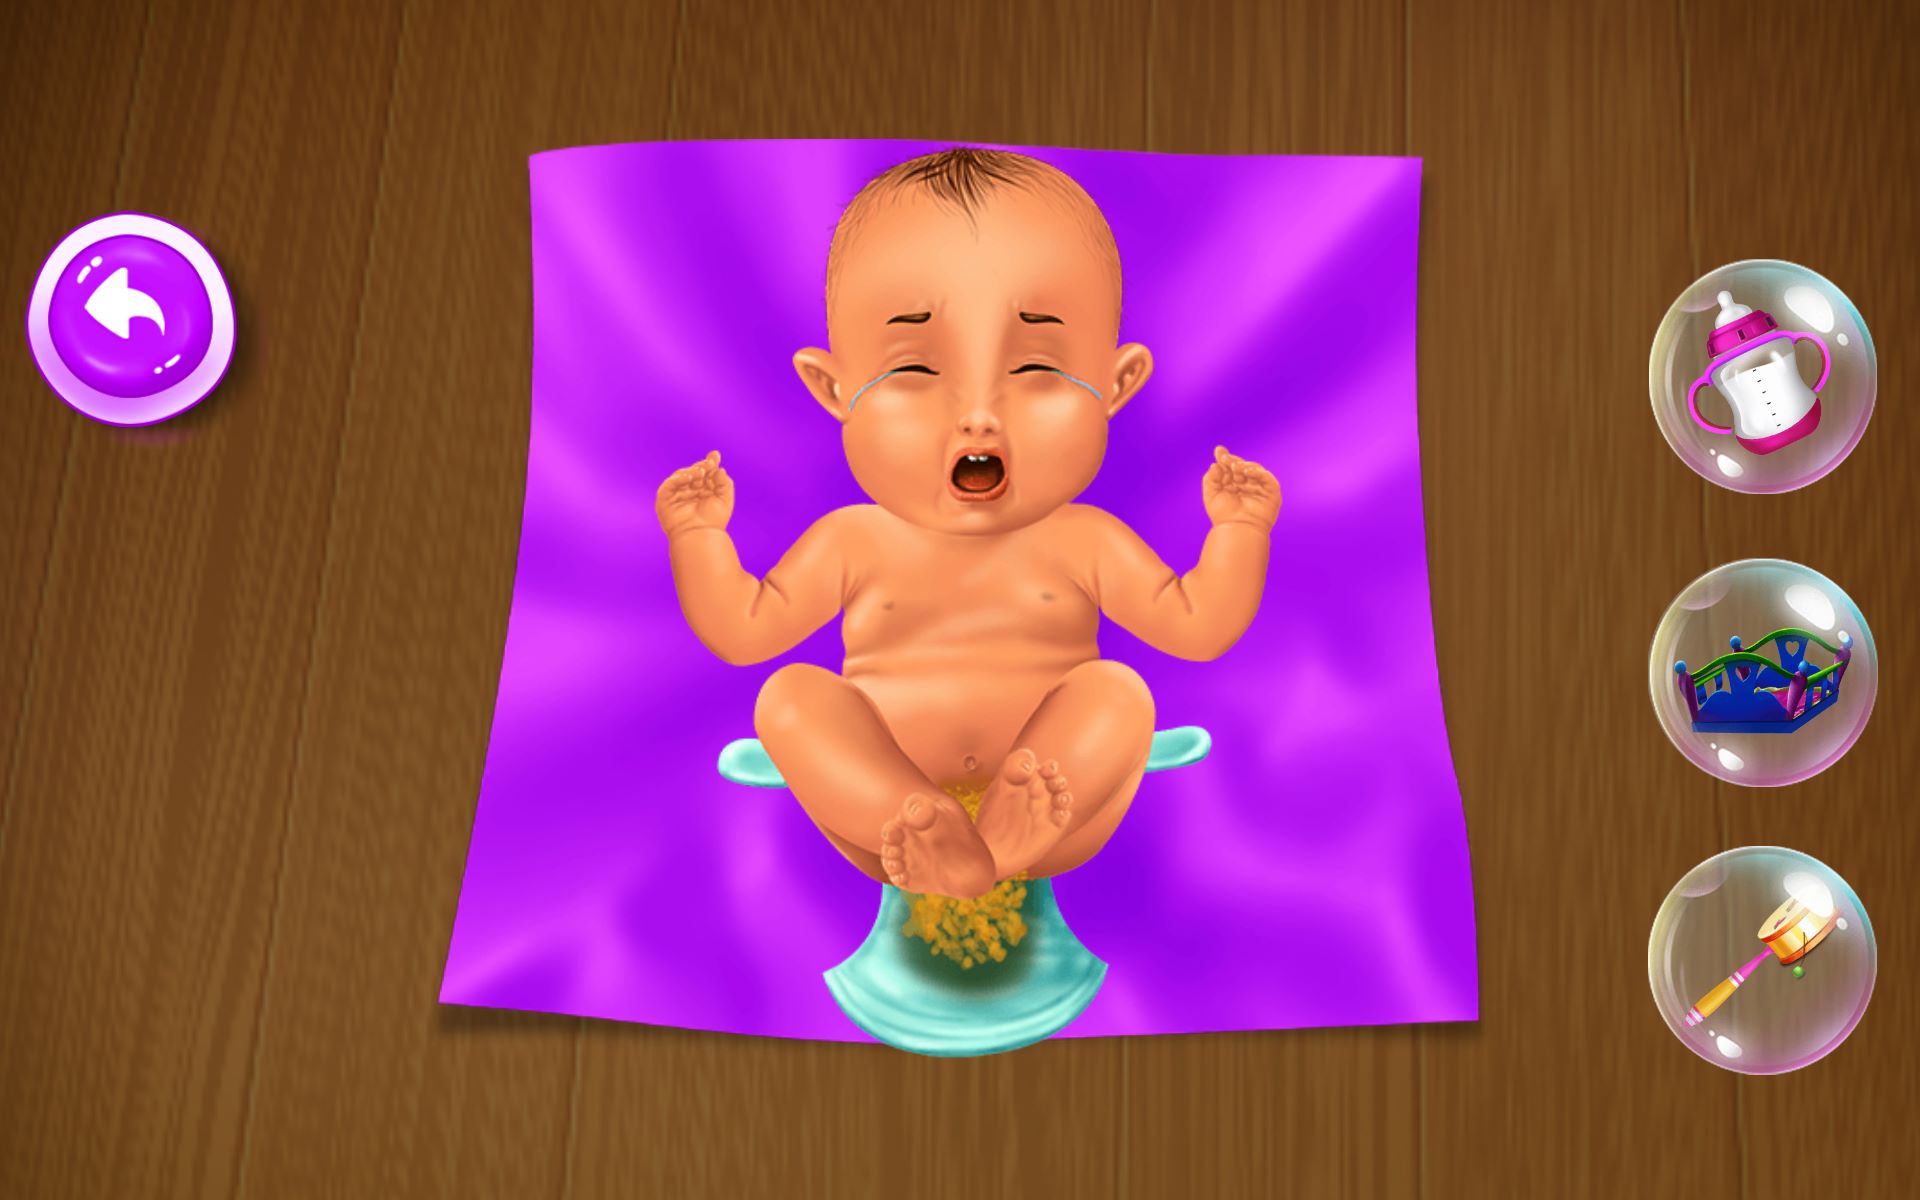 Babysitter Care Baby Game for Girls::Appstore for Android